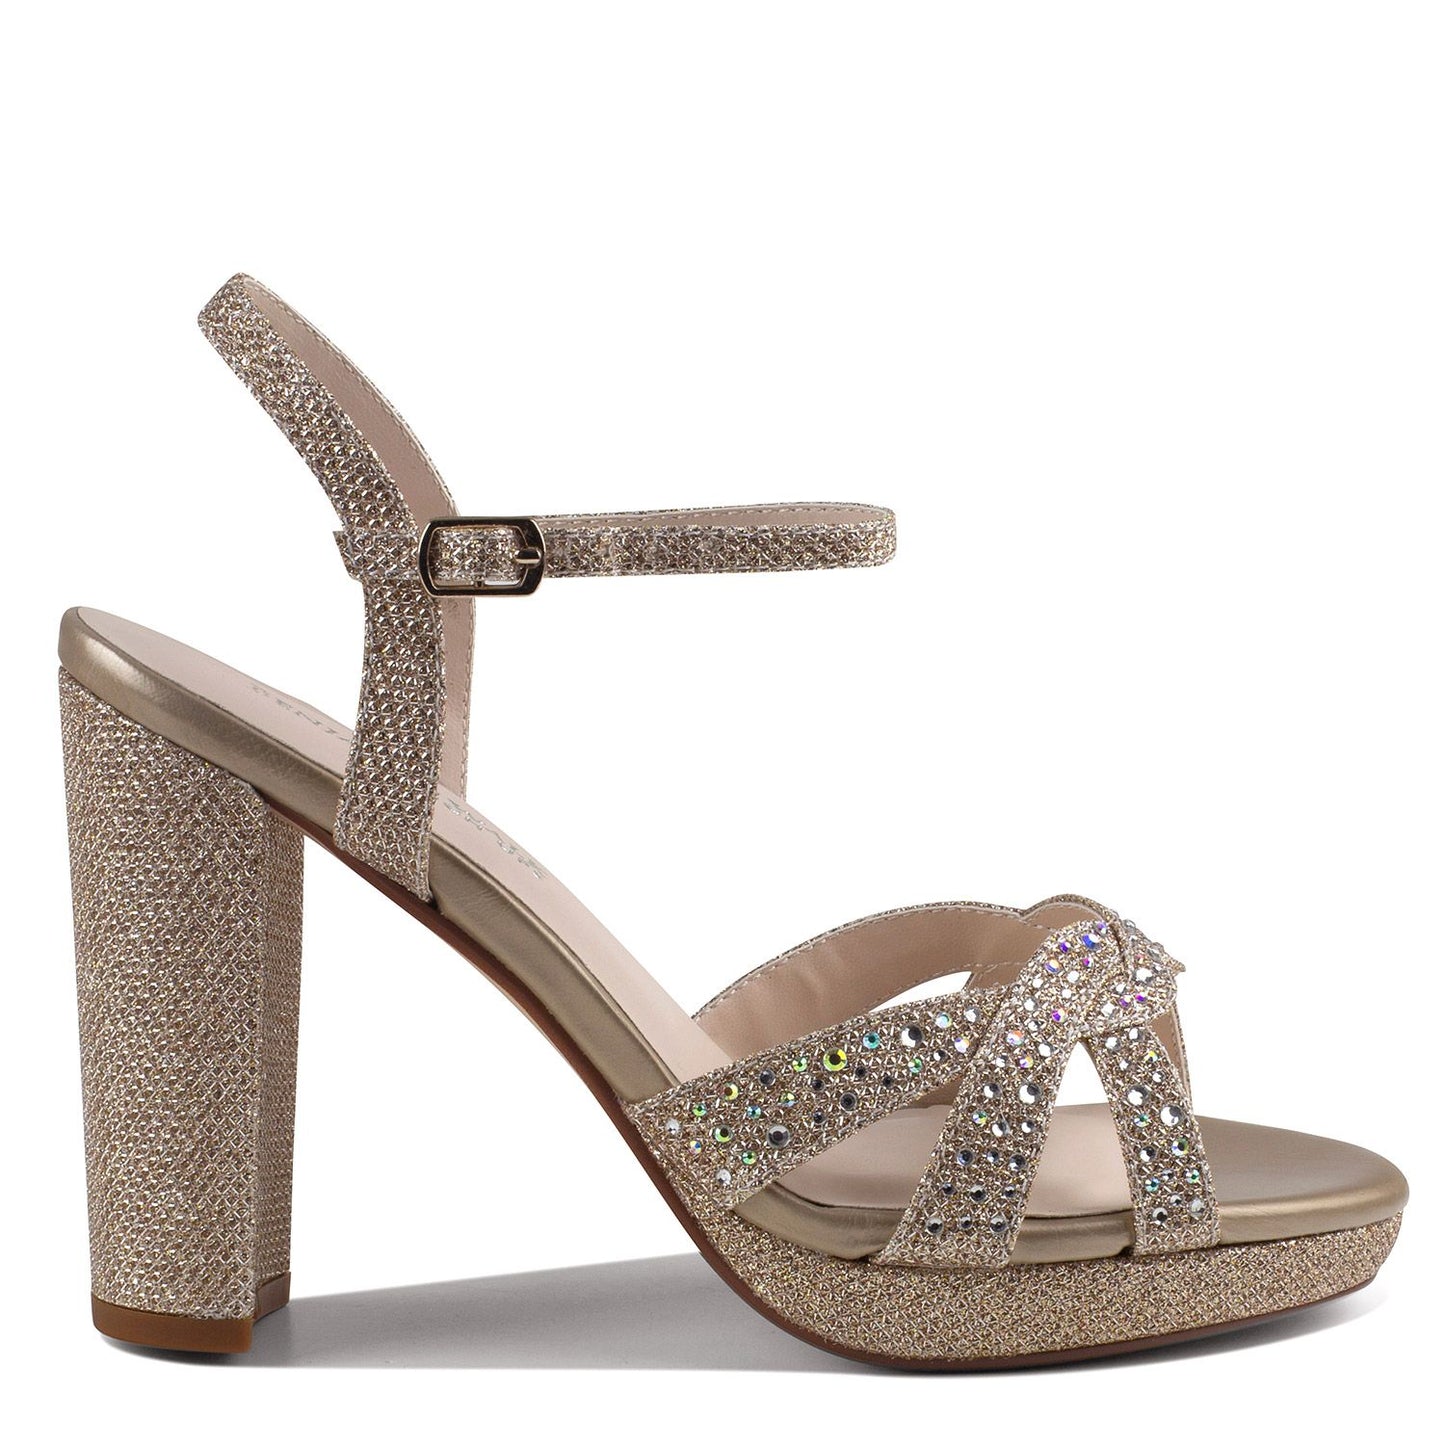 Side view of Champagne glitter platform shoe with 3.75 heel with open toe.